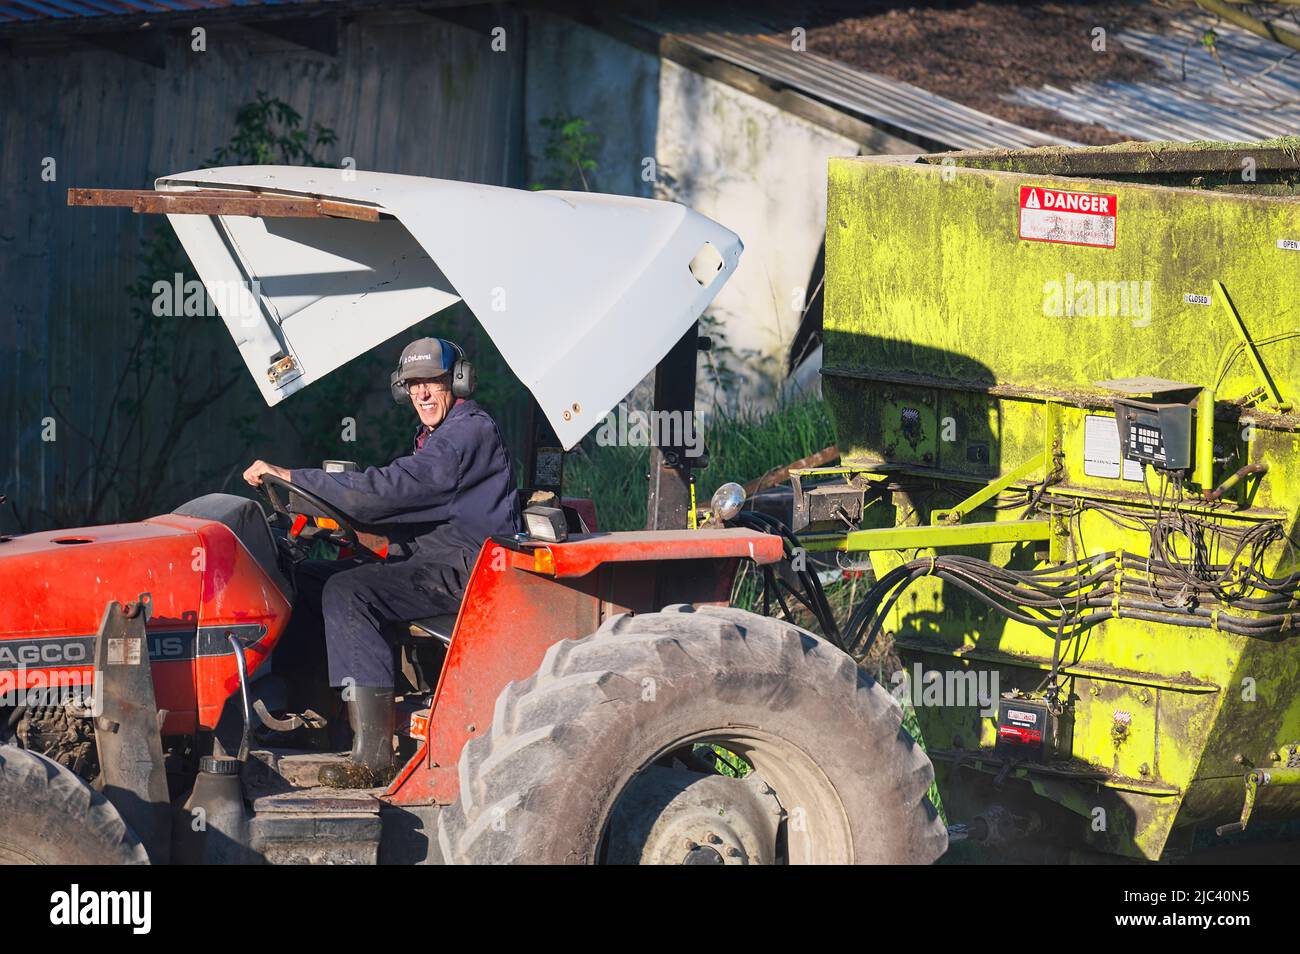 Farmer on tractor wearing headphones in front of a farm building. Stock Photo